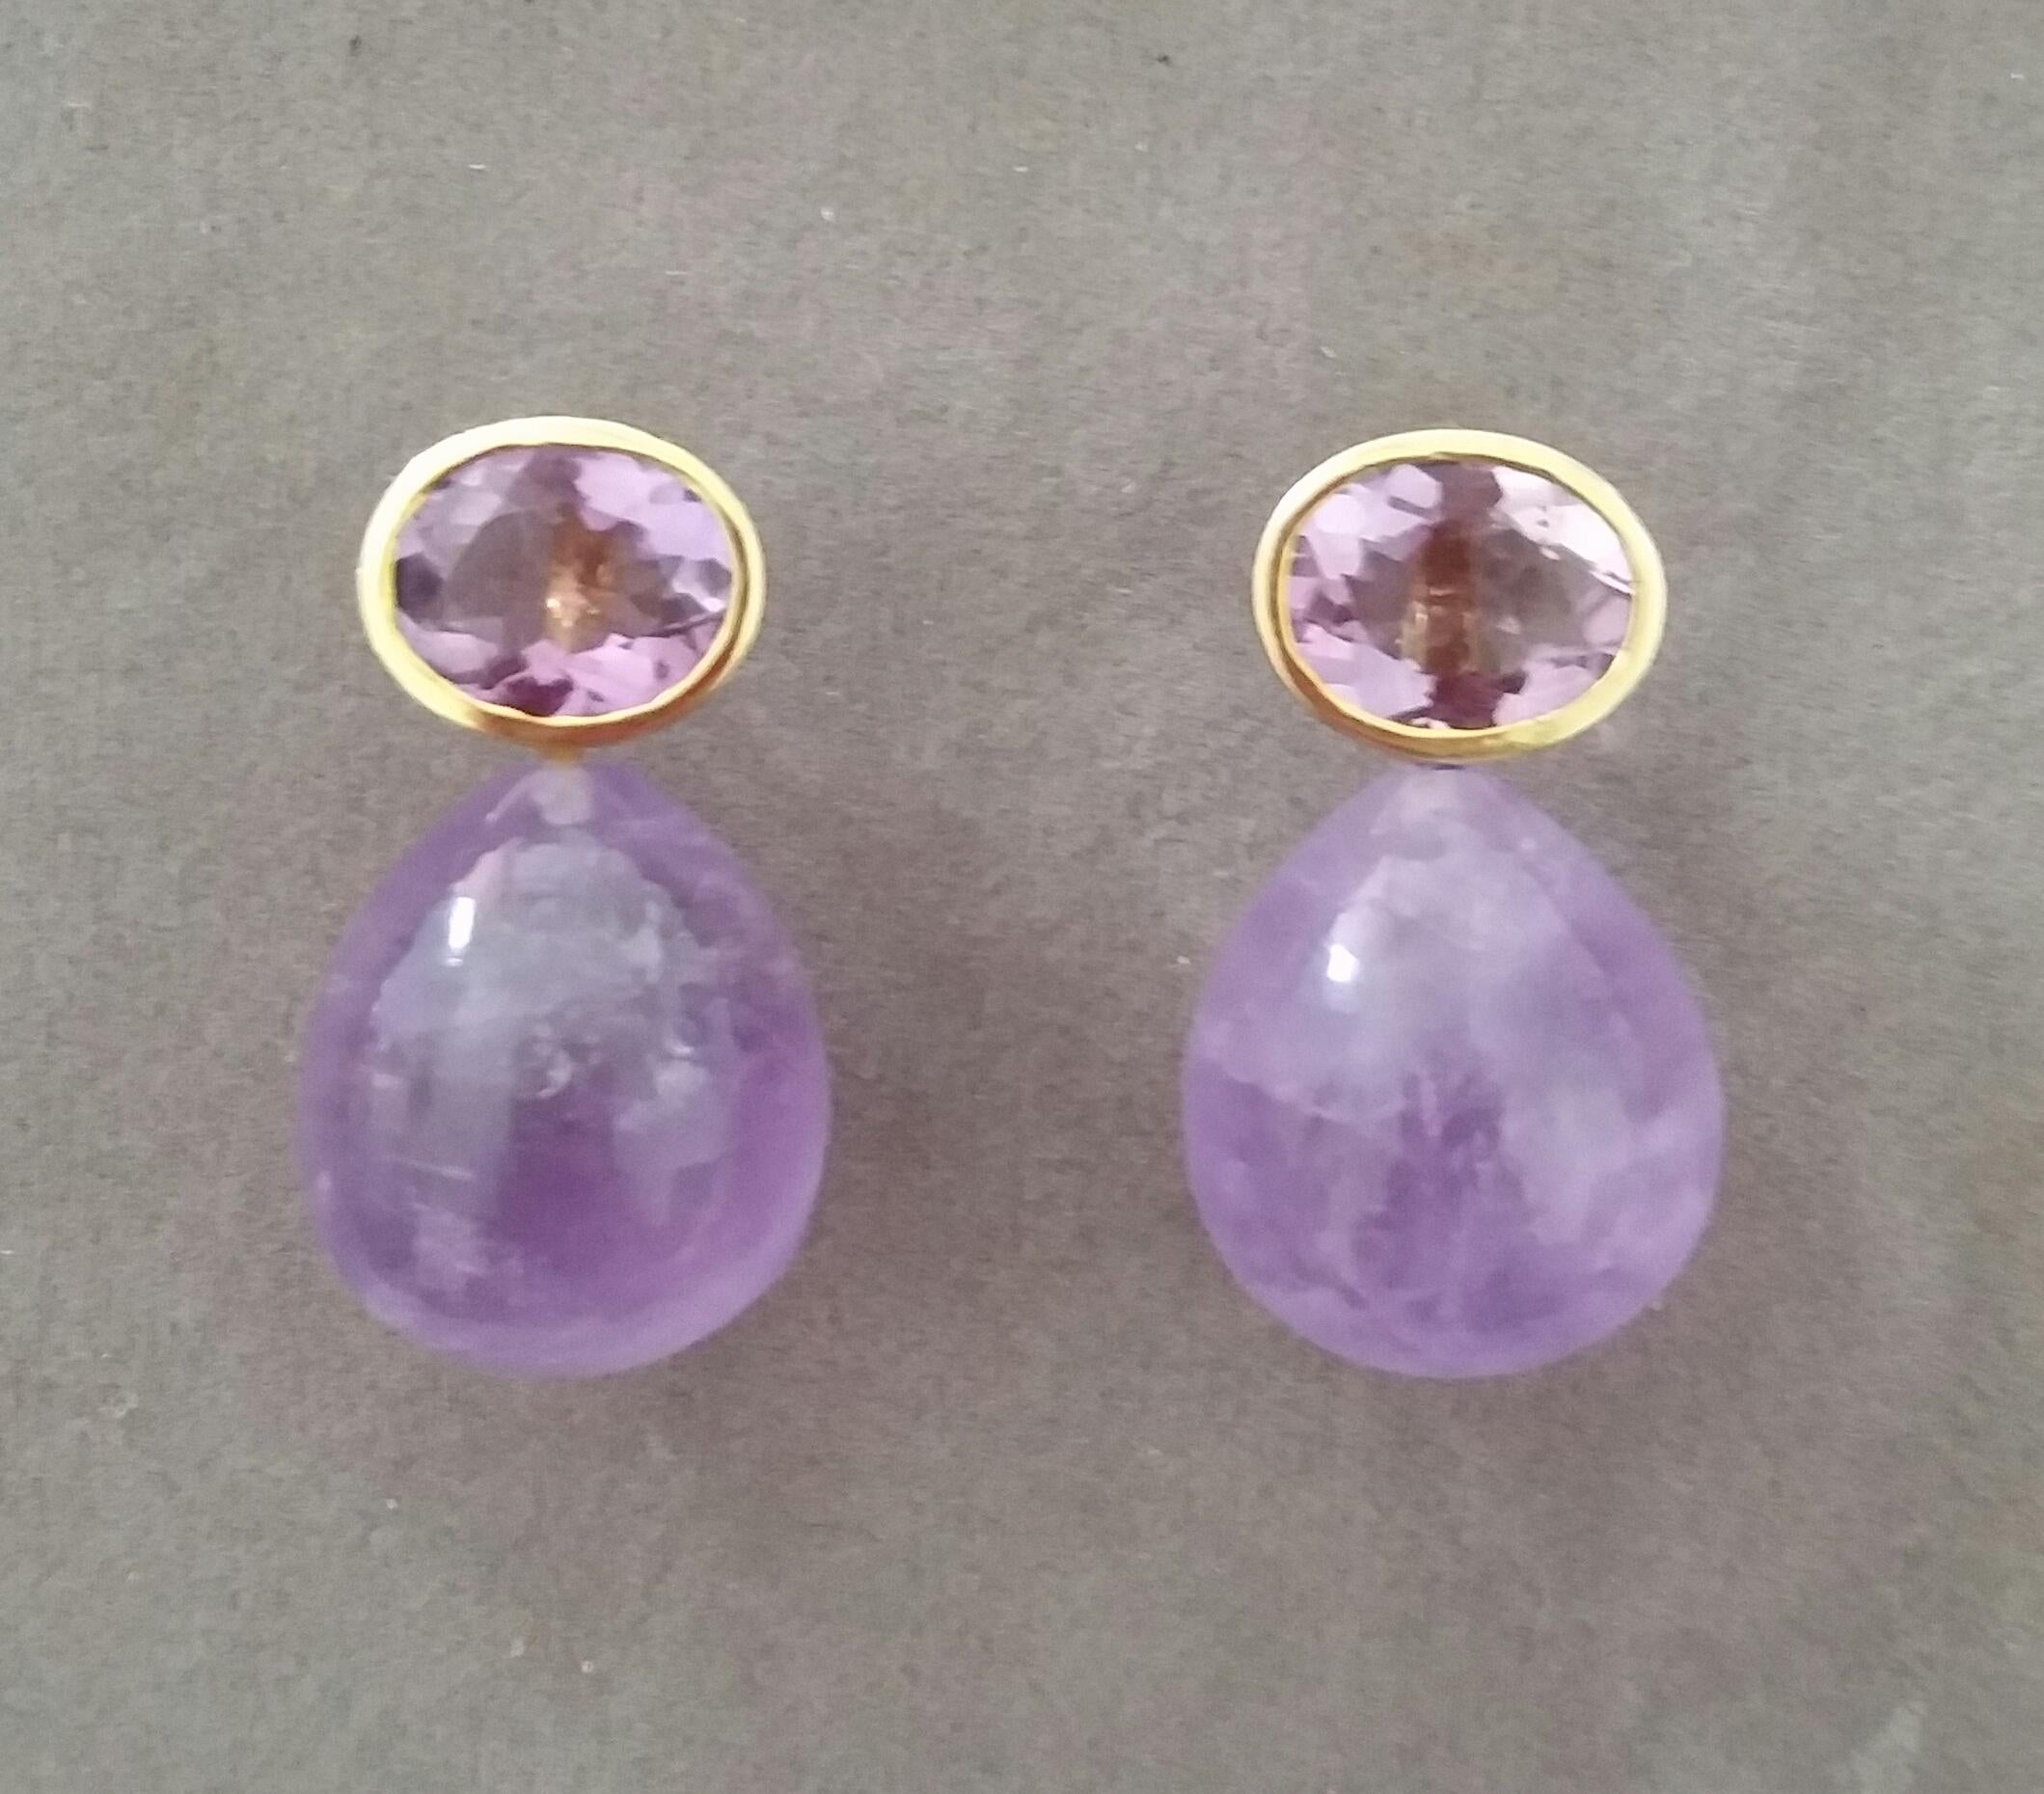 Simple chic stud earrings with a pair of Oval Cut Amethyst measuring 8mm x10 mm set in solid 14 Kt. yellow gold on the top and in the lower parts 2 Round Plain Amethyst Drop measuring 15x16 mm .
In 1978 our workshop started in Italy to make